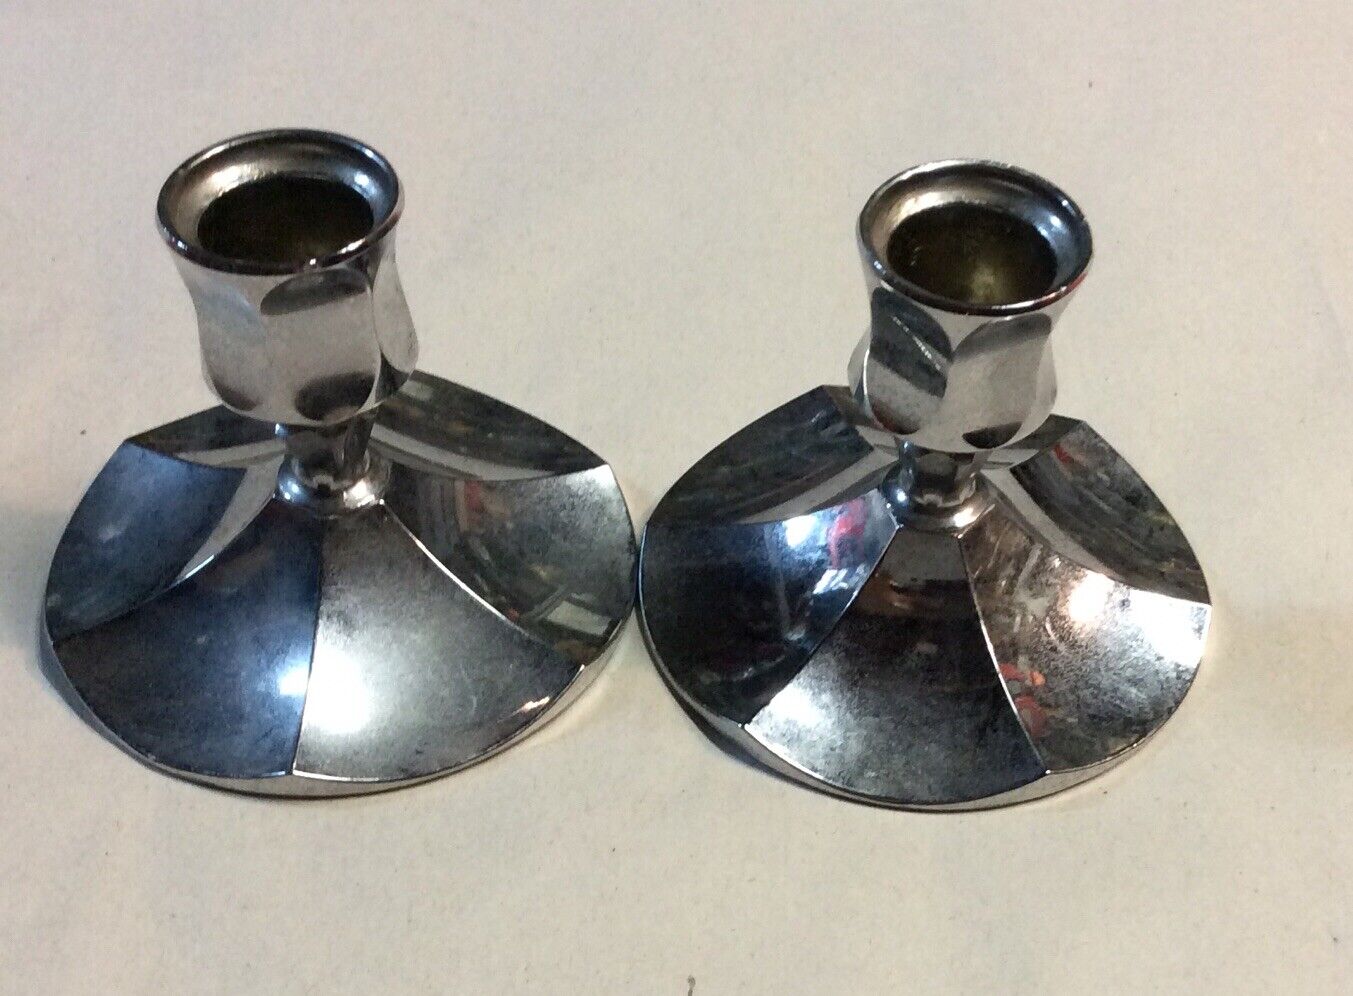 VTG Pair of Chrome Irvin Ware Candle Stick Holders Made in USA 3” Height